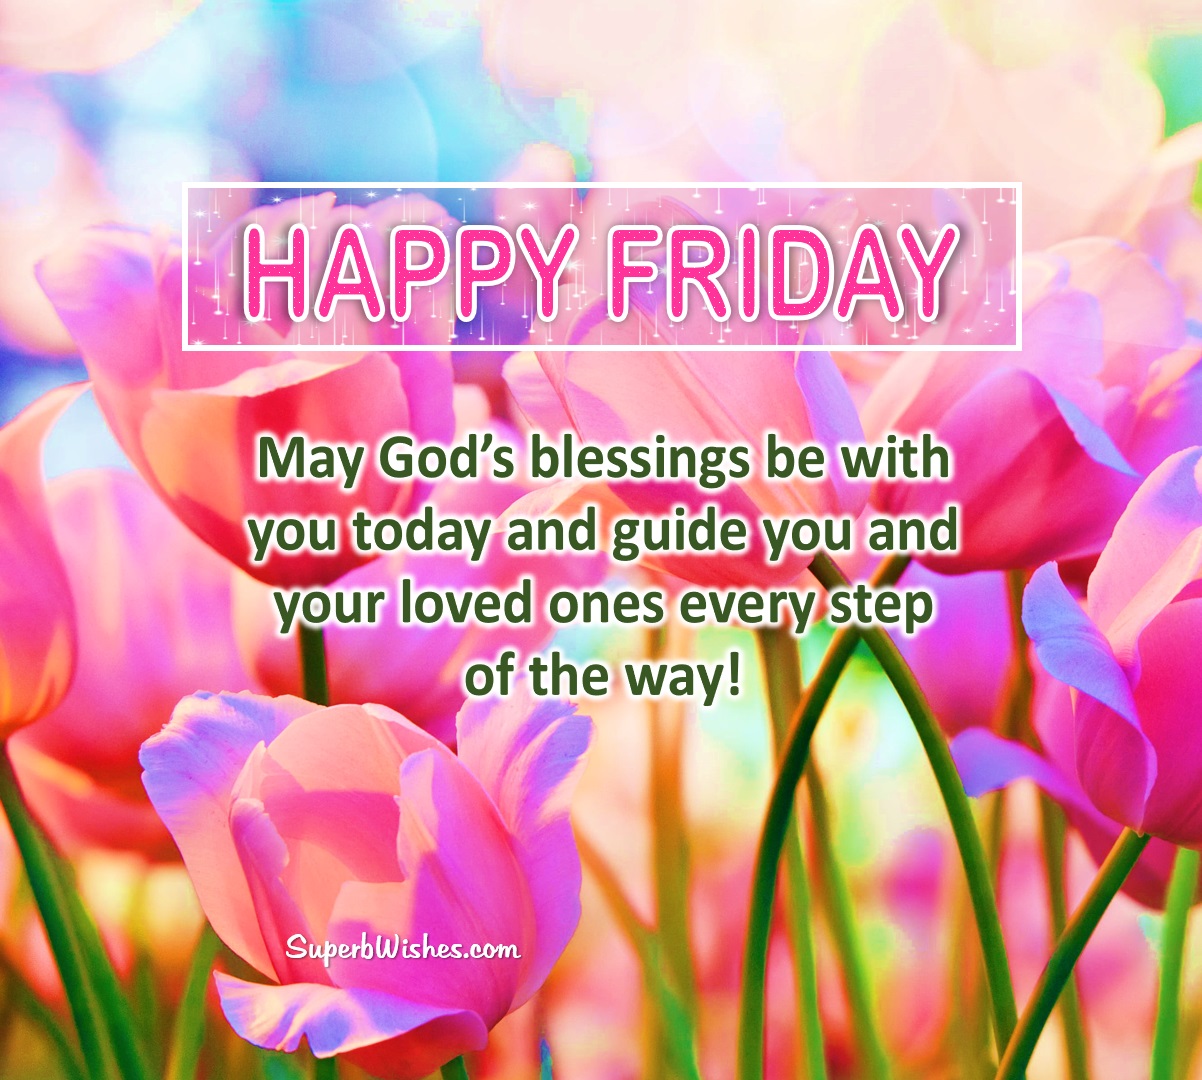 Happy Friday Images - May God's Blessings Be With You | SuperbWishes